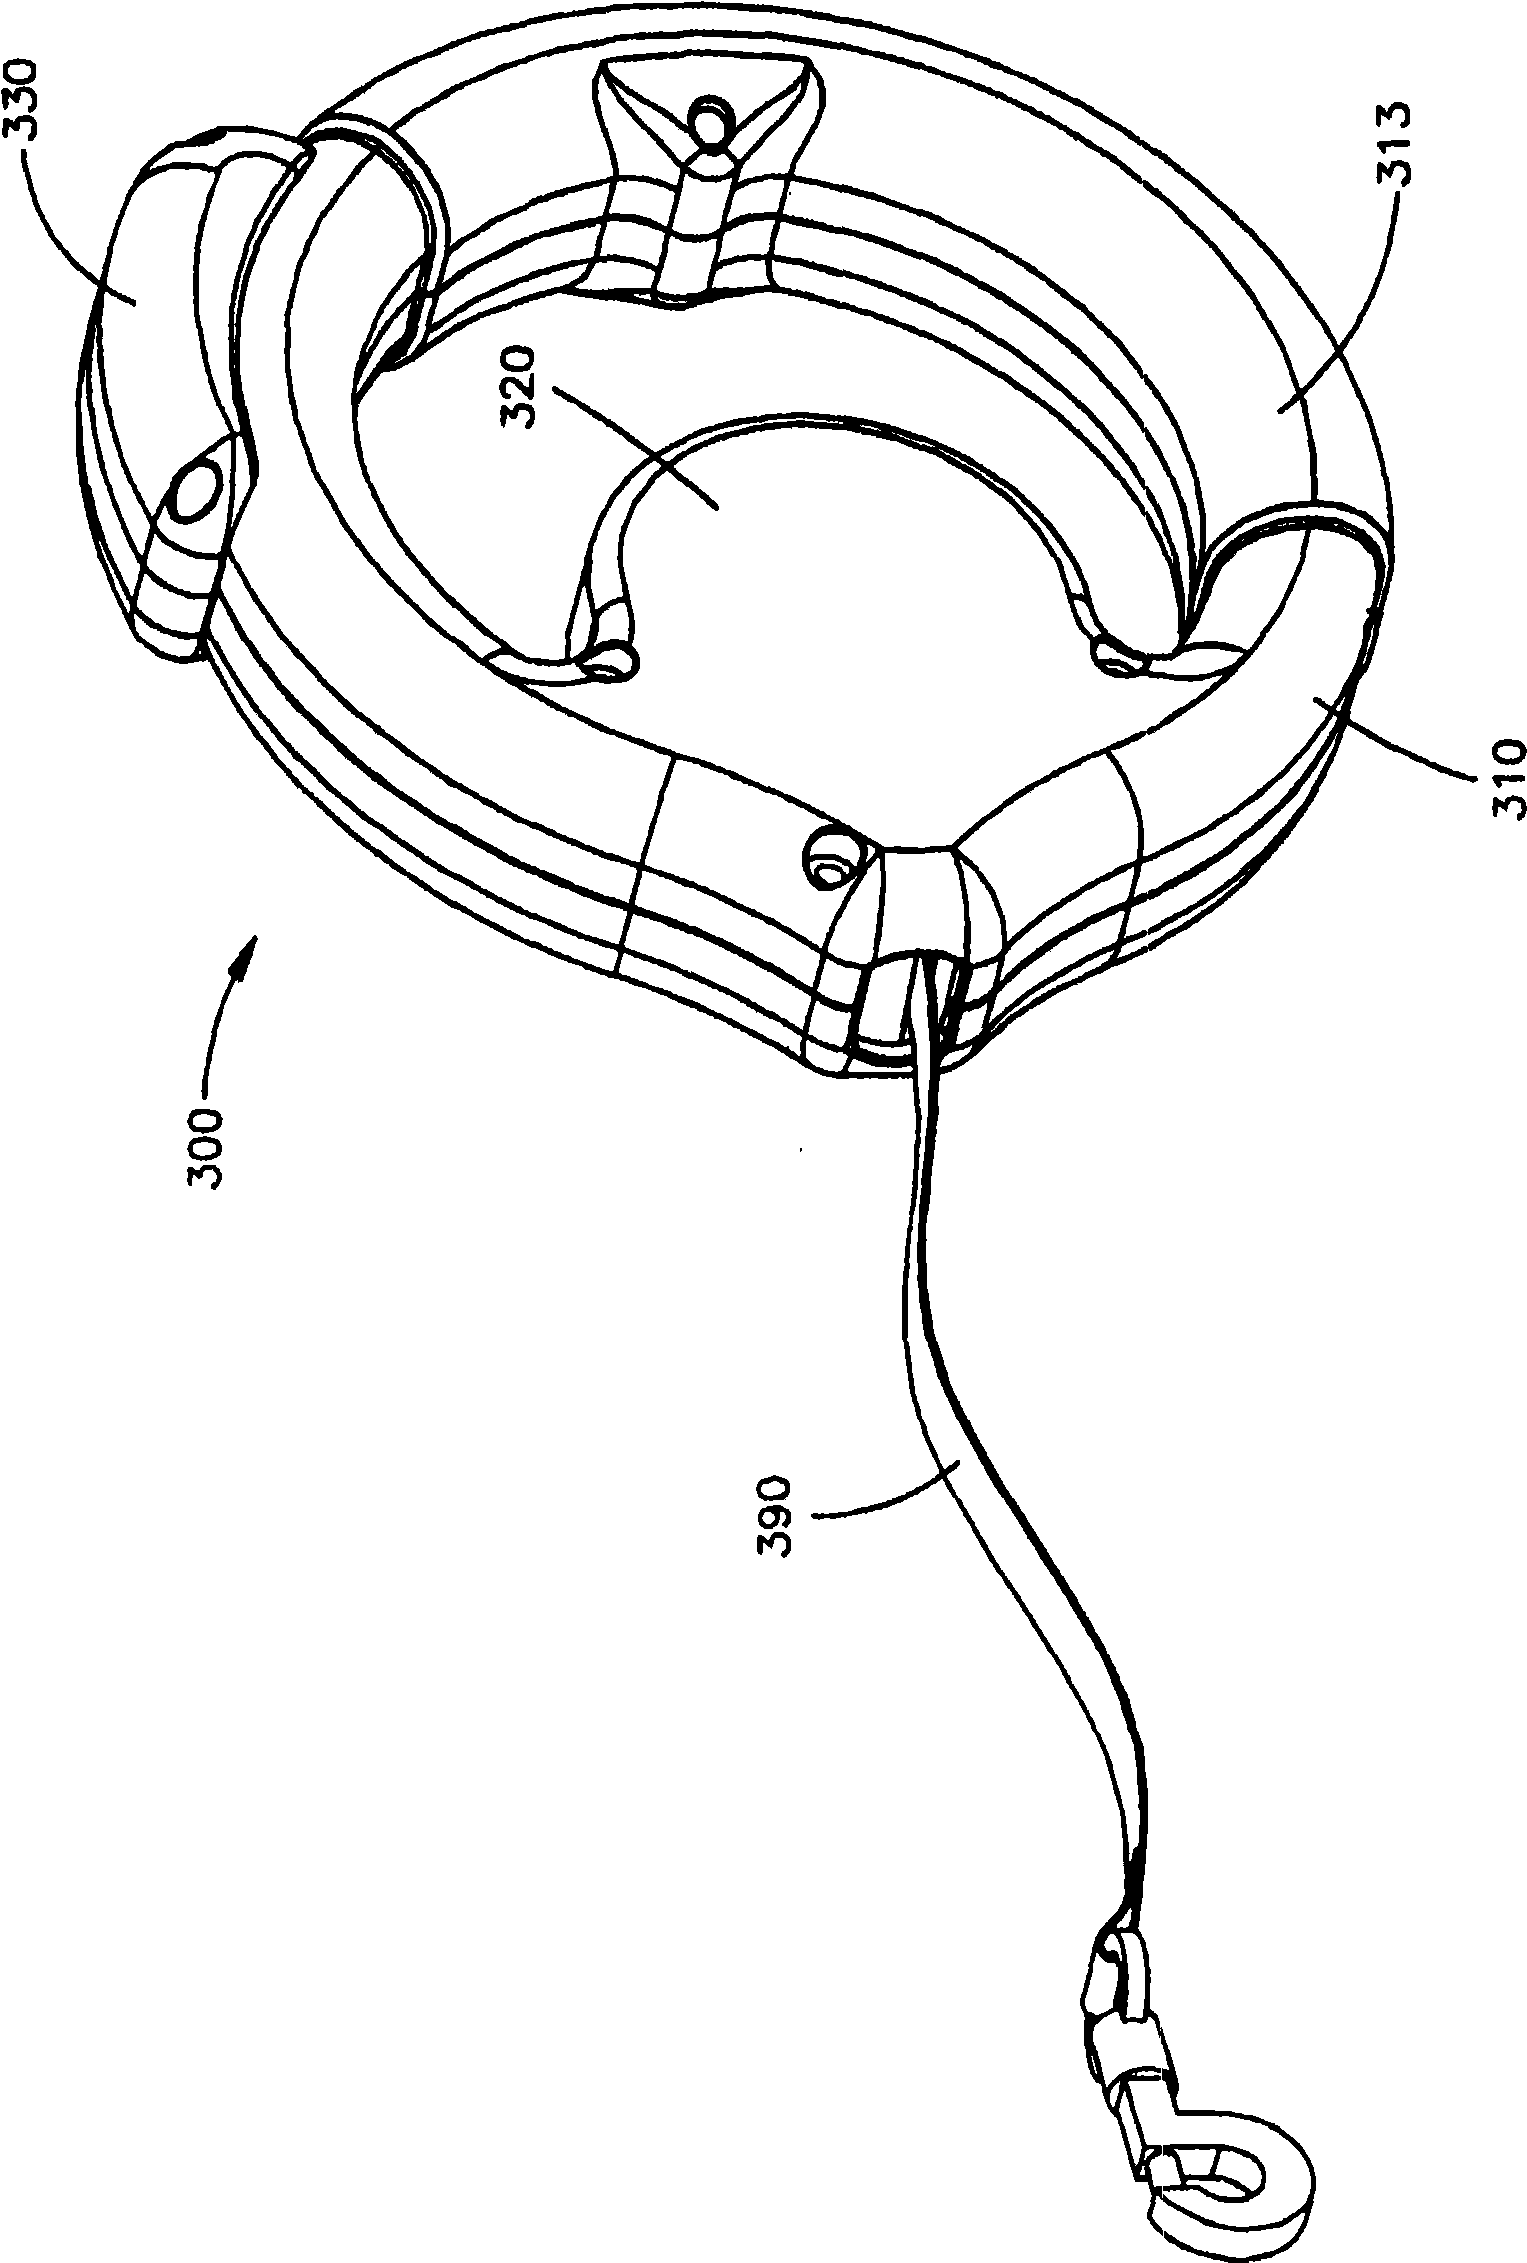 Ring-shaped retractable pet lead